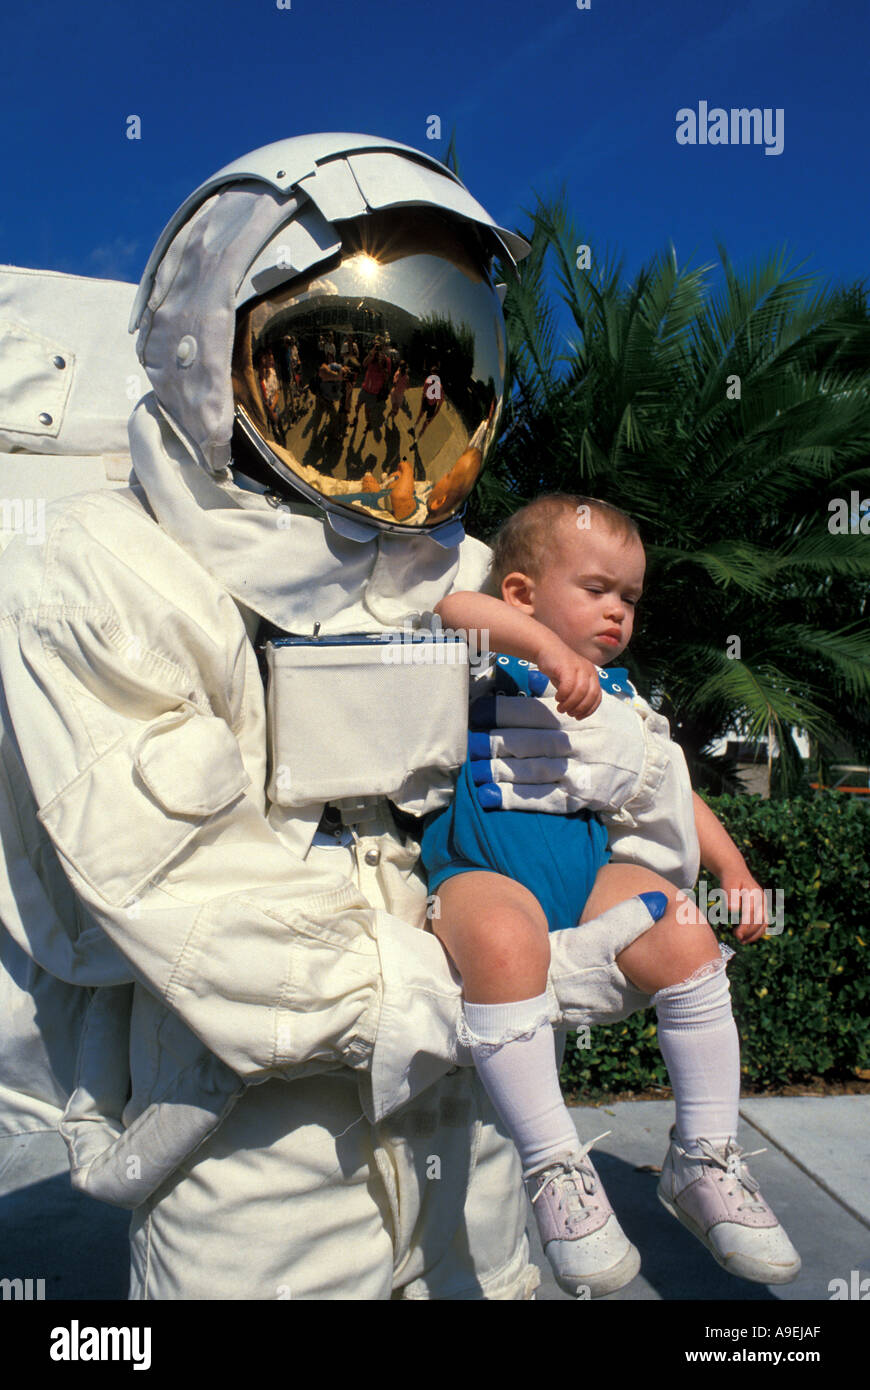 Orlando Florida USA Attractions Kennedy Space Center Titusville Astronaut holding baby Stock Photo